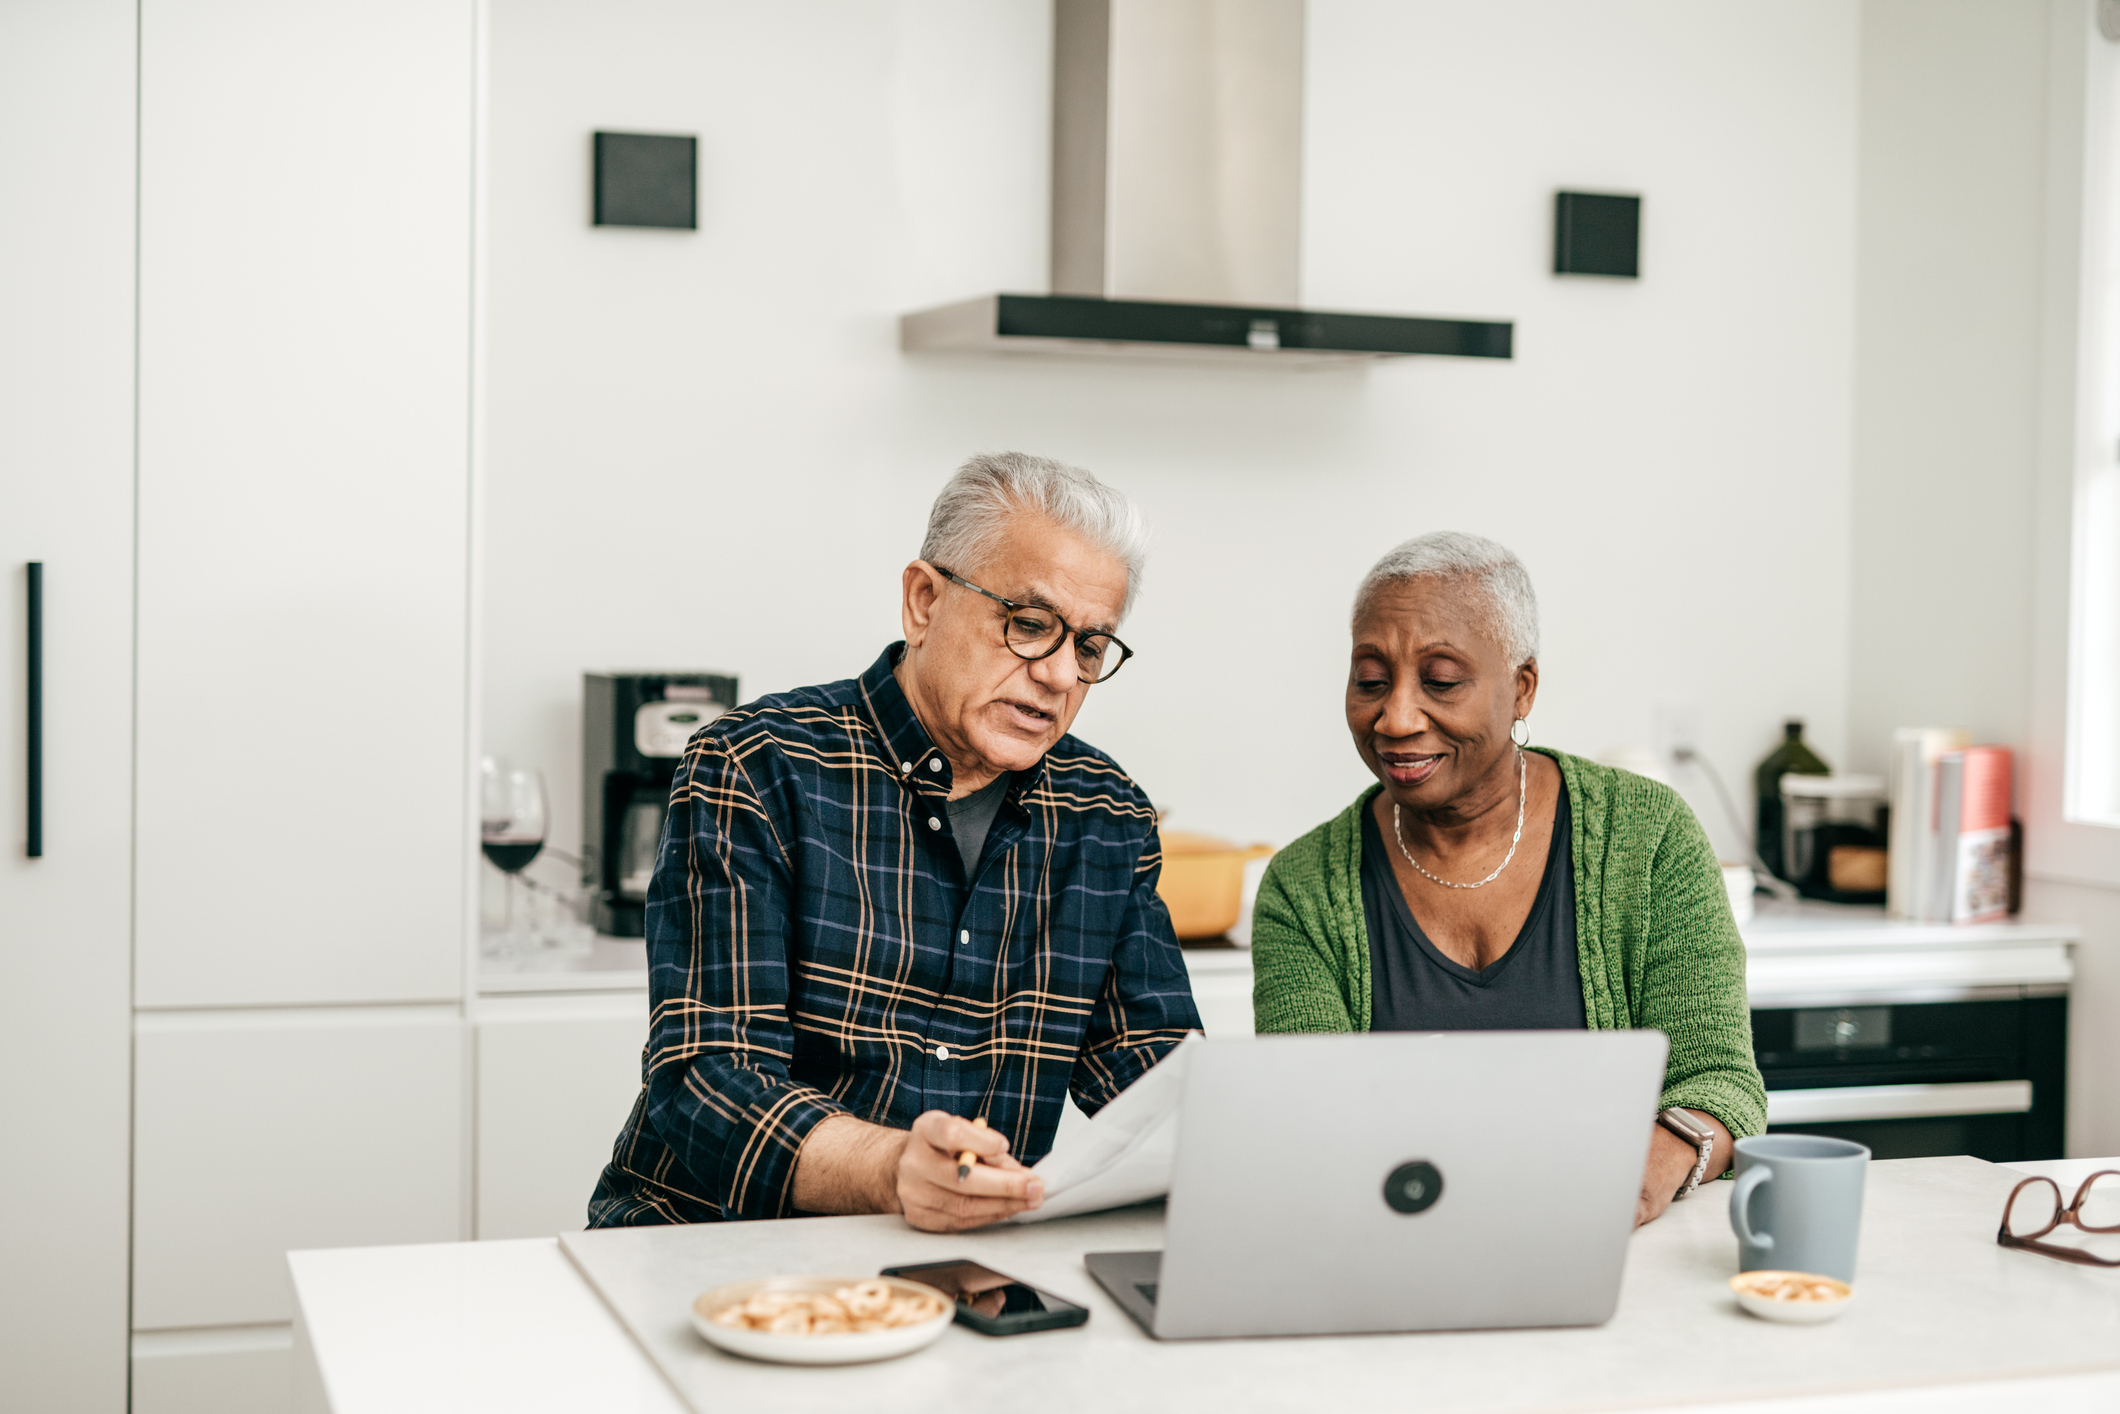 An elderly man and woman sit at a kitchen counter, reviewing documents and using a laptop, possibly discussing finances or work-related matters